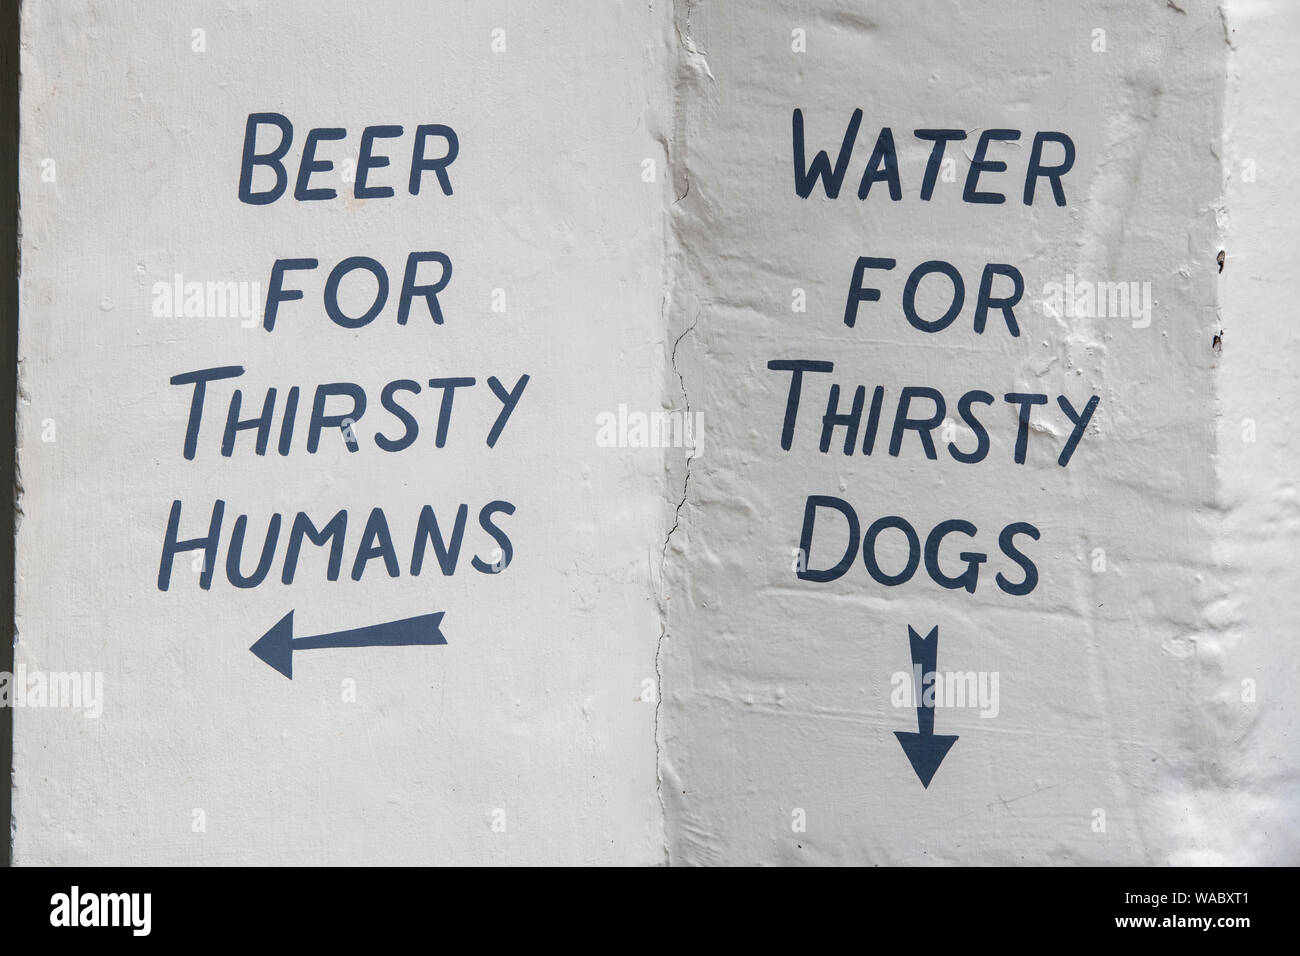 Beer for thirsty humans, water for thirsty dogs. Hand painted sign on a pub wall in Cirencester, Cotswolds, Gloucestershire, England Stock Photo